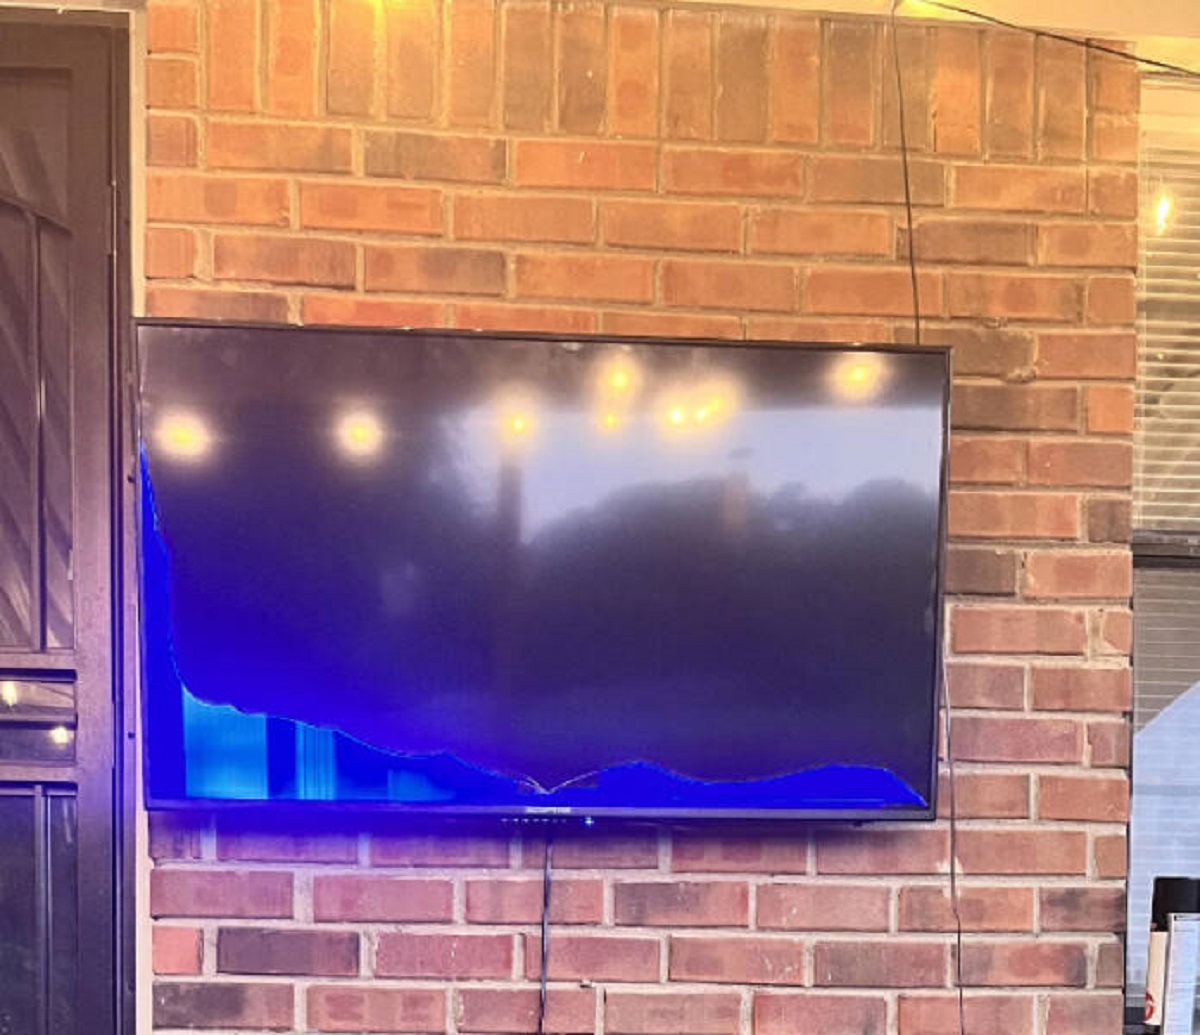 “My dad bought a TV off of someone through Facebook Marketplace….”